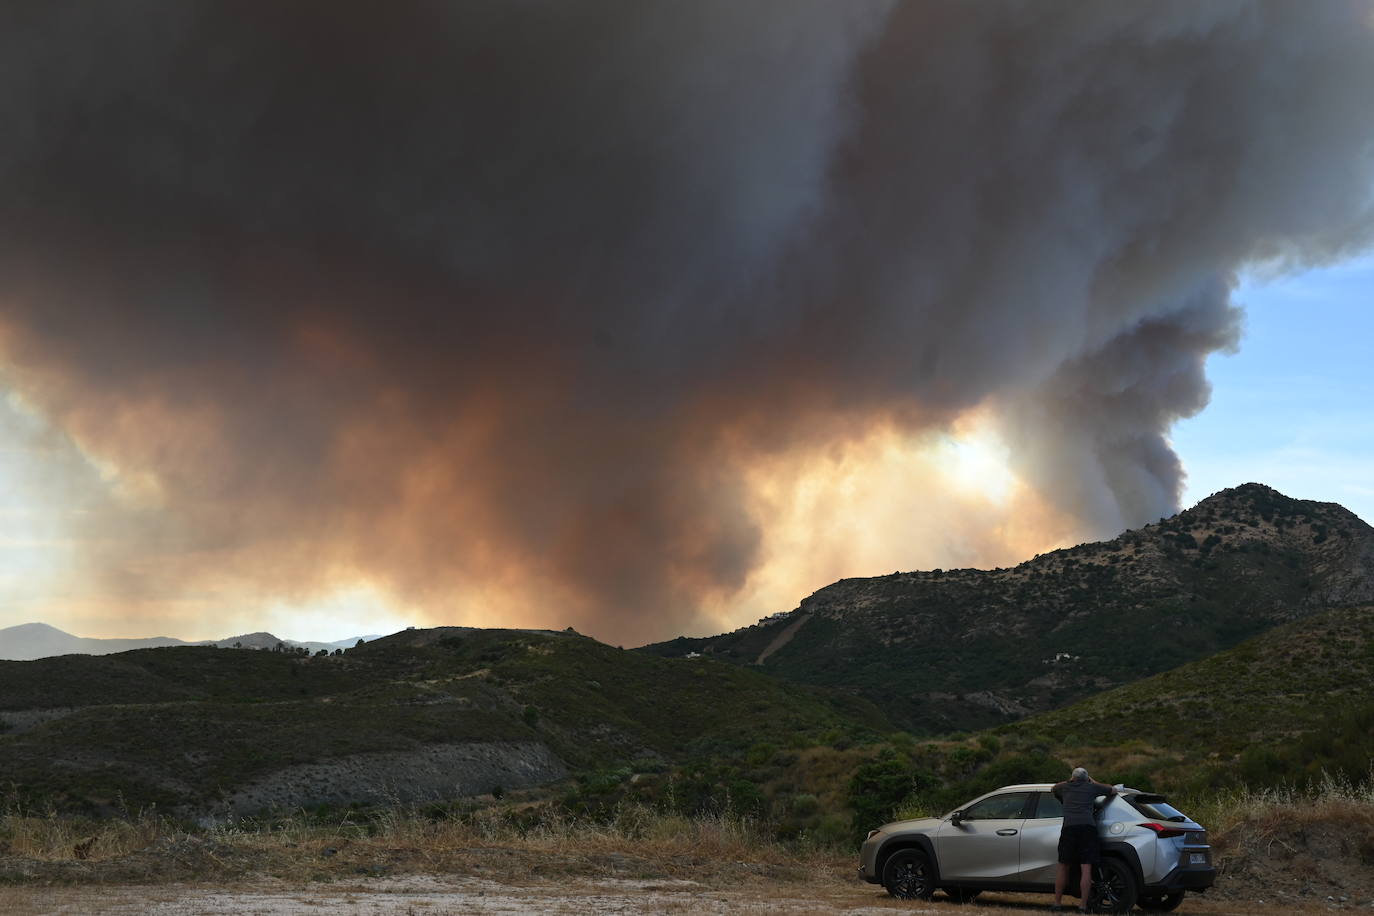 The flames were visible from several points in Malaga province.